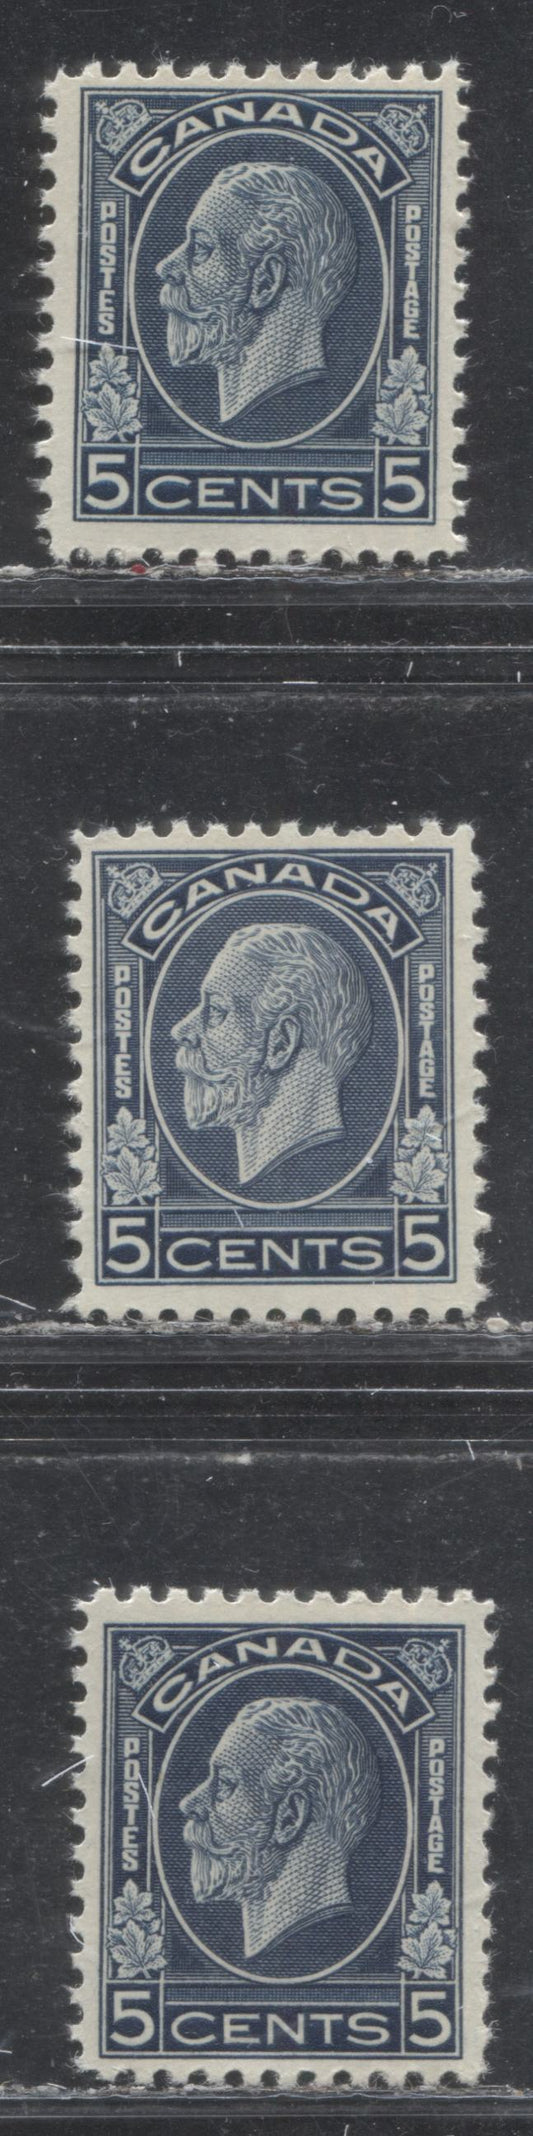 Lot 294 Canada #199 5c Dark Blue King George V, 1932 Medallion Issue, 3 Fine NH Singles With Additional Shades or Gum Types